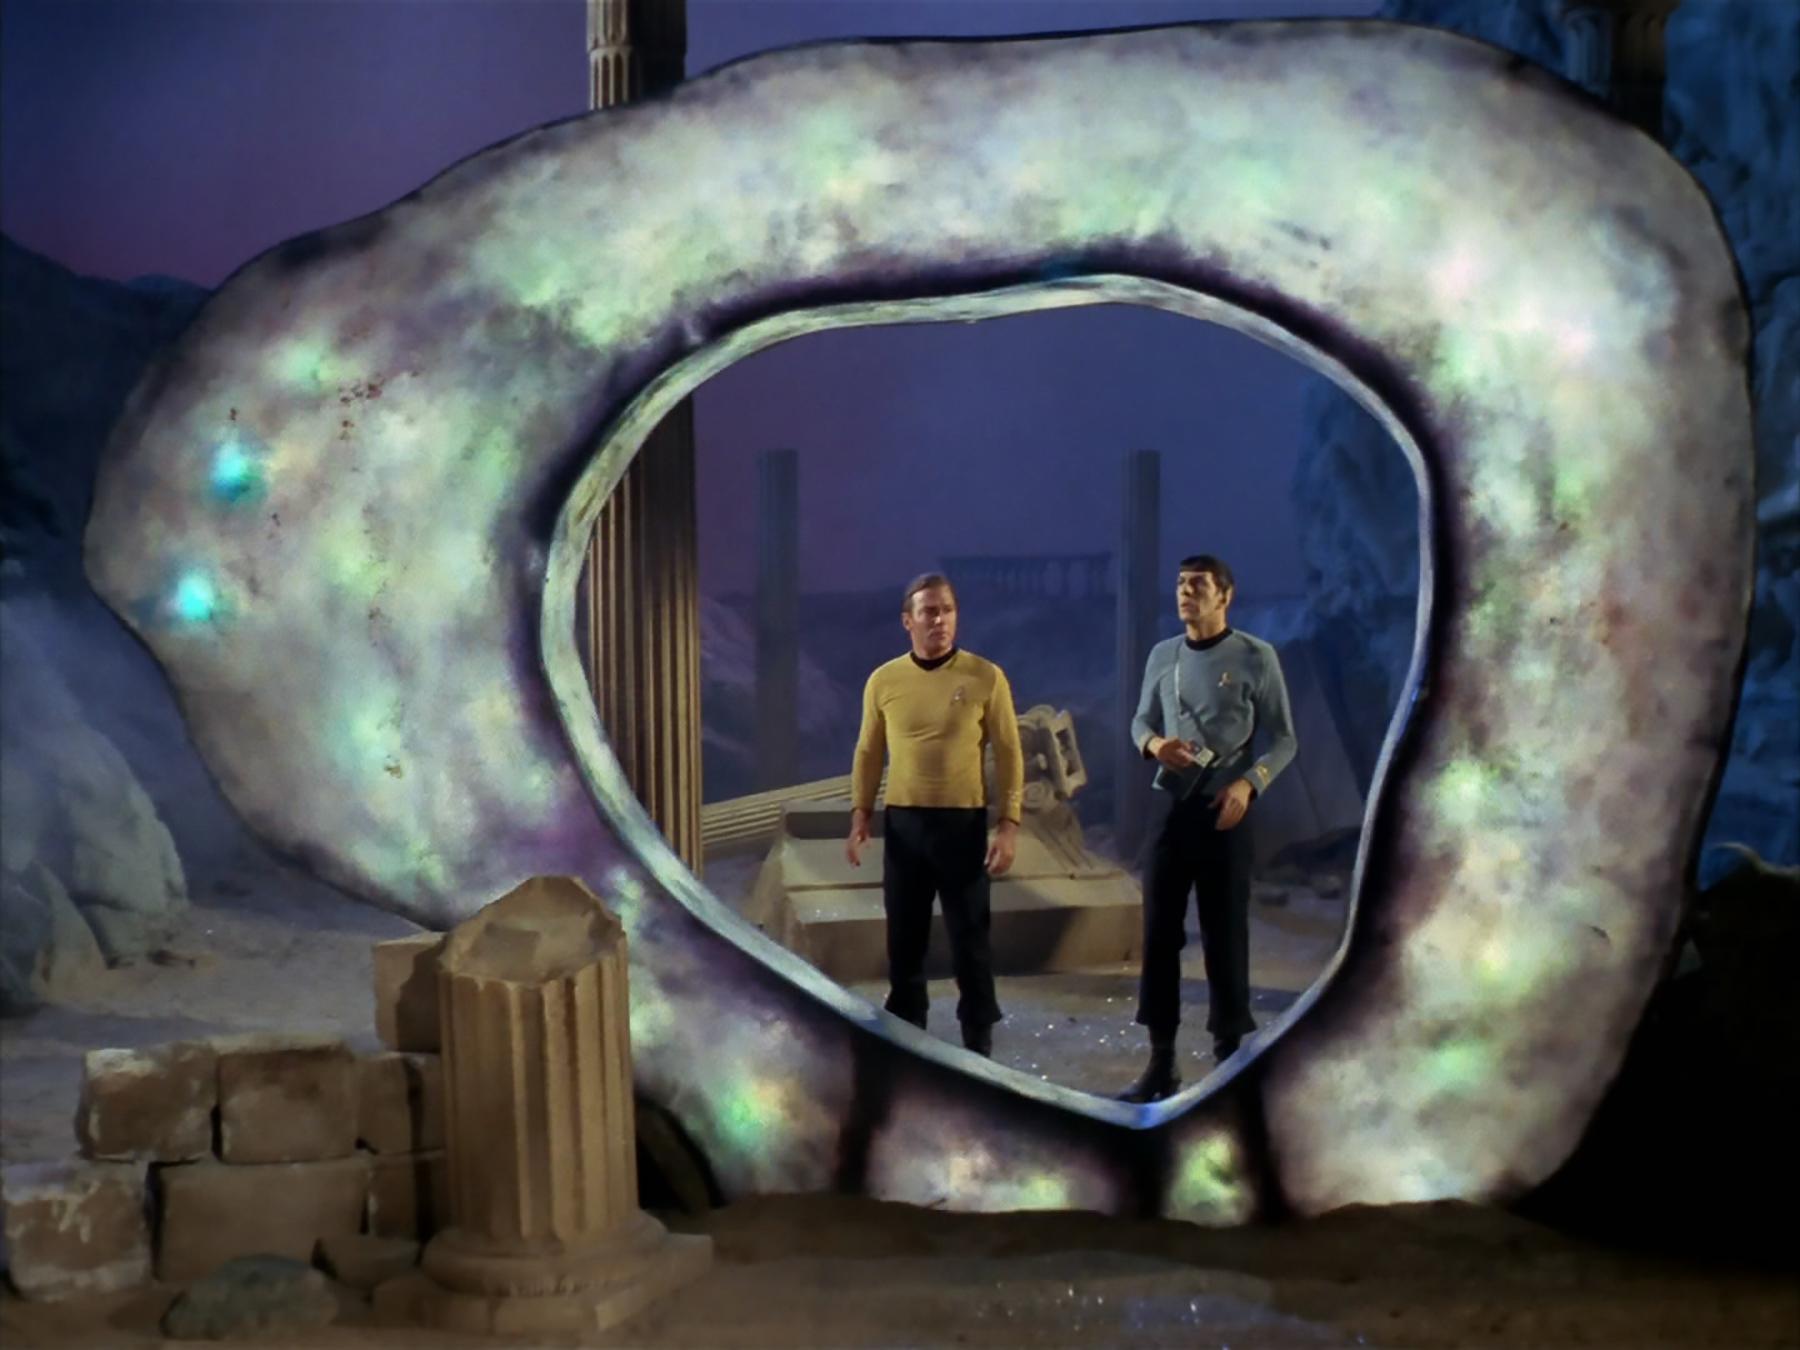 Star Trek’s Captain Kirk and First Officer Spock in front of a portal to an alternative timeline in the episode “The City on the Edge of Forever.”